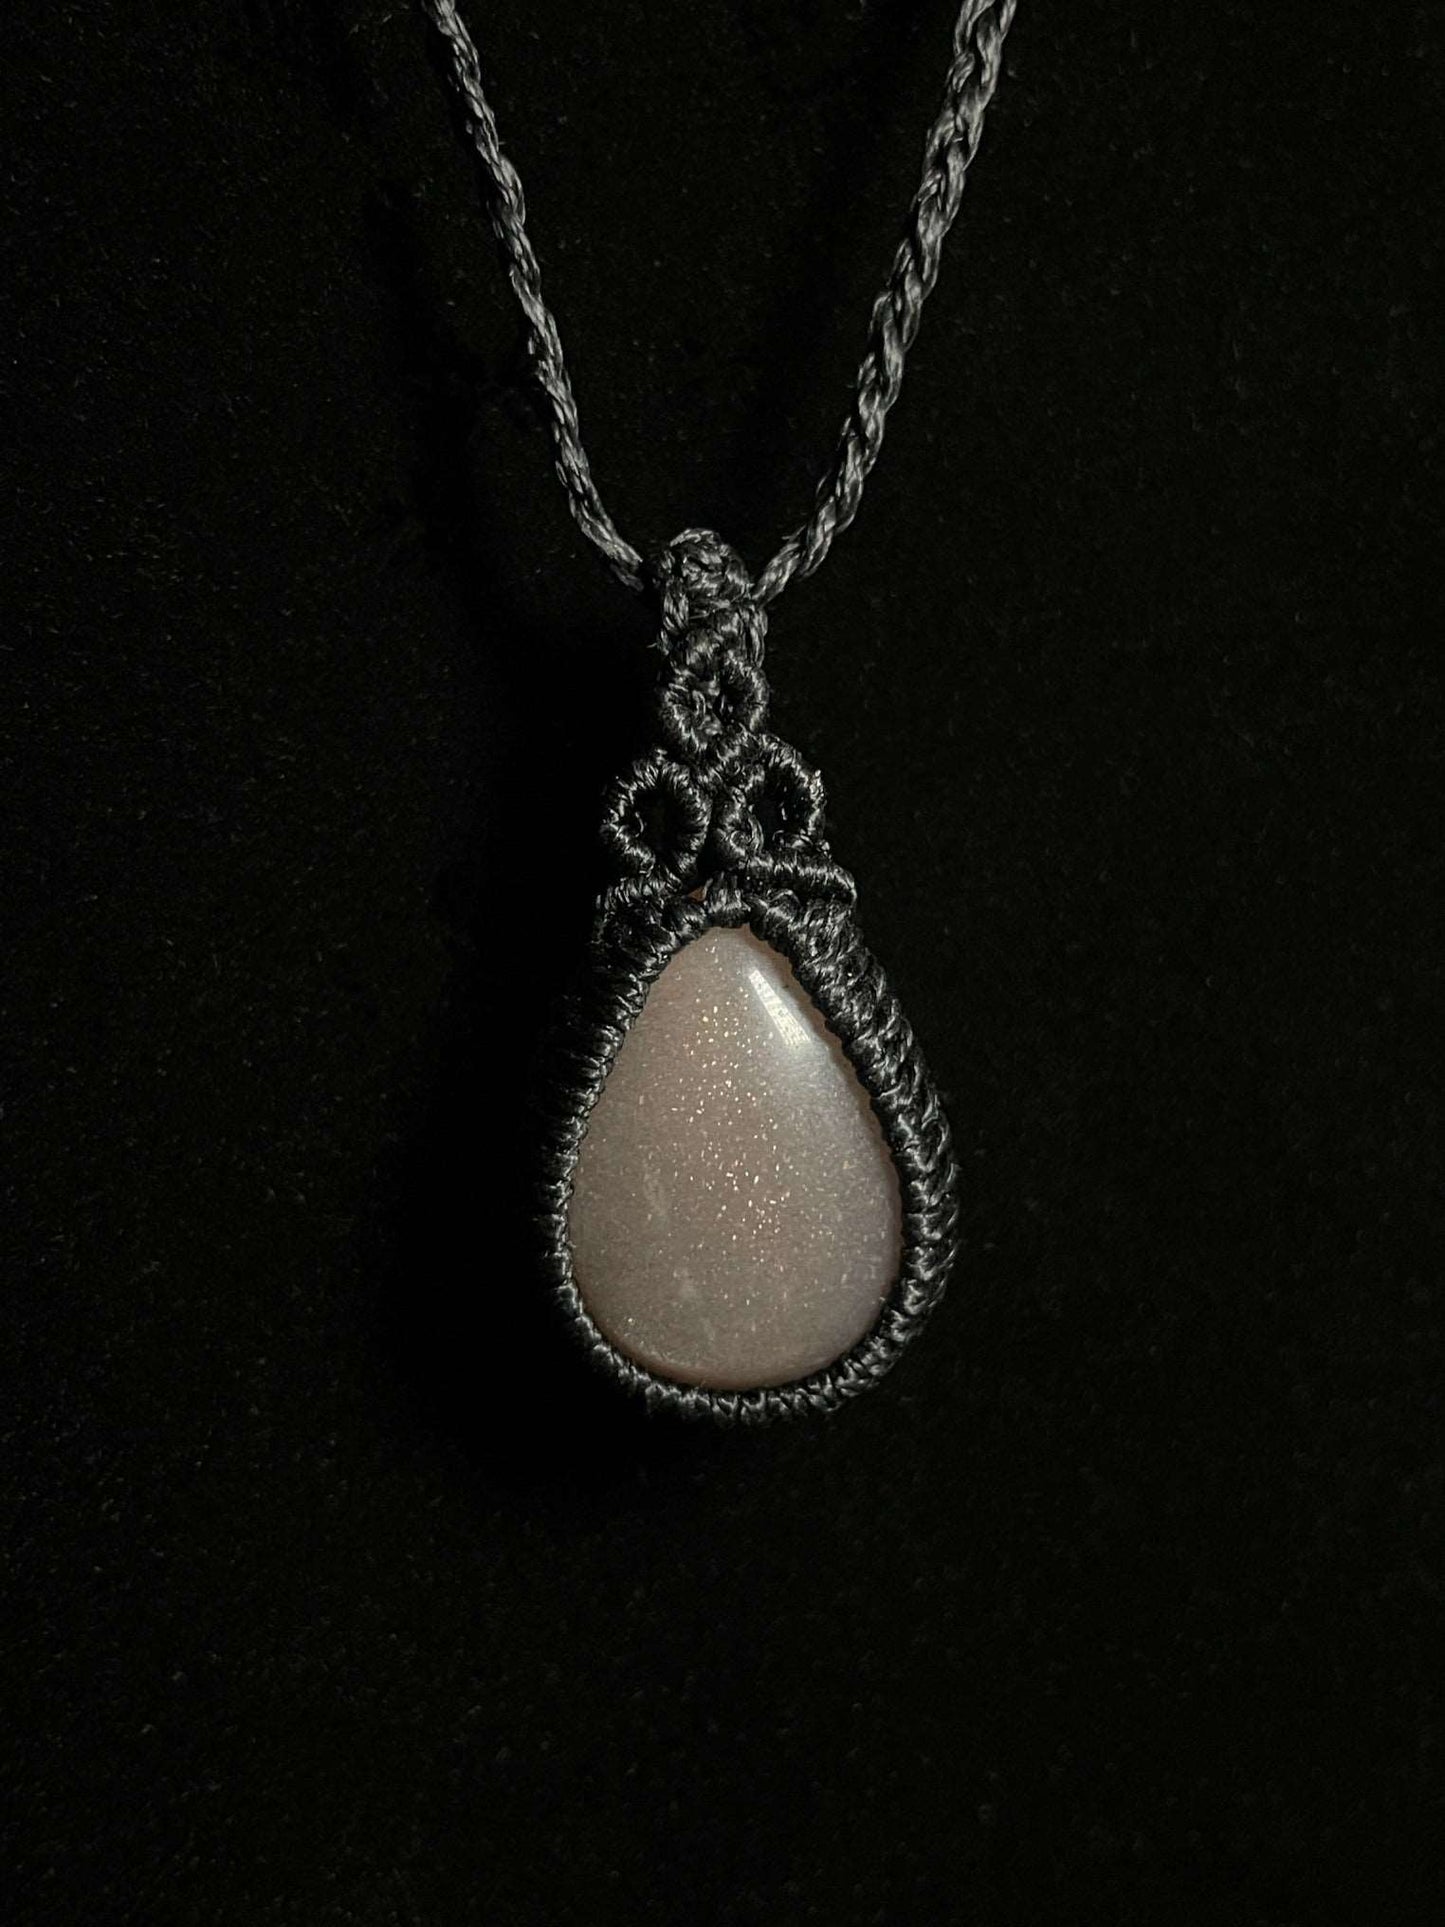 Pictured is a grey moonstone cabochon wrapped in macrame thread. A gothic book and flowers are nearby.